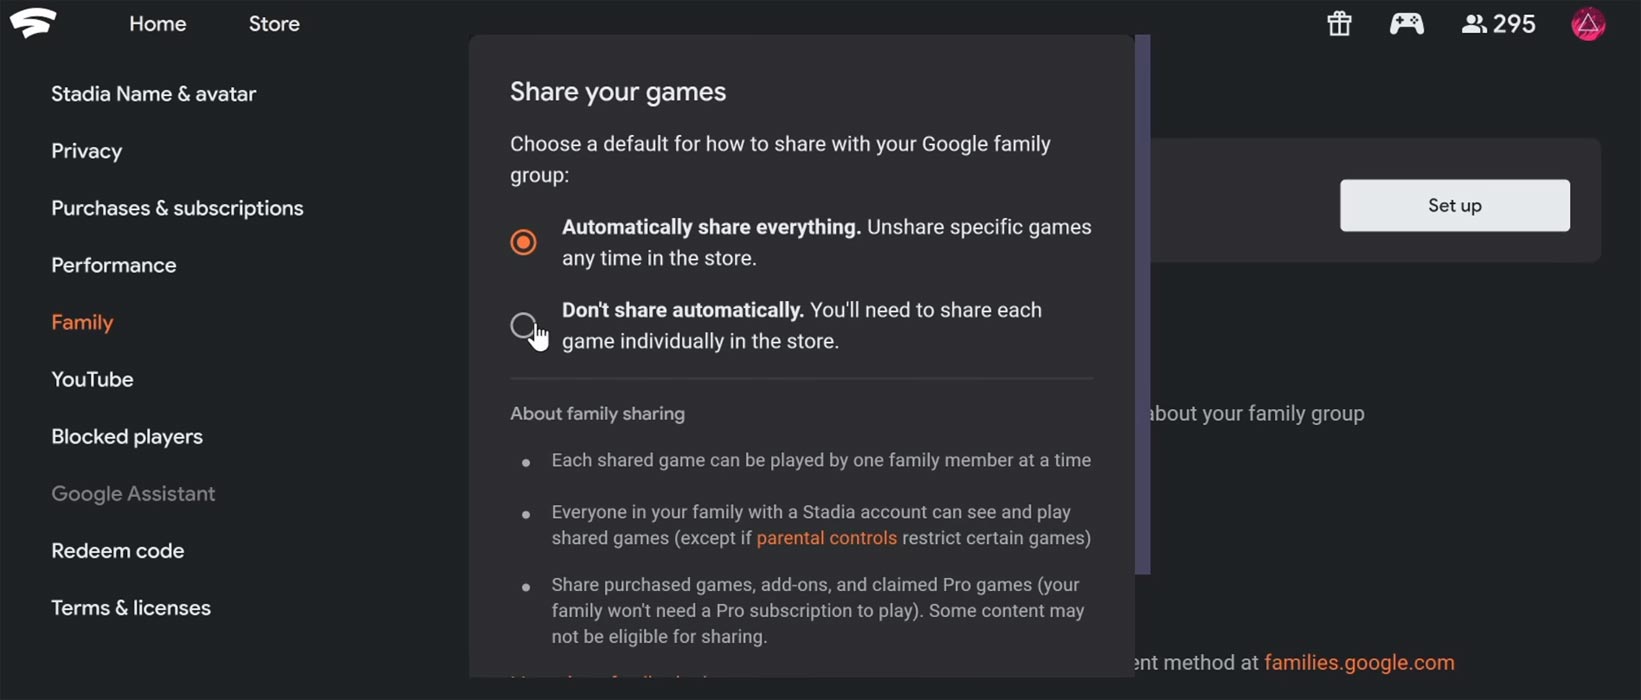 Share Games in Google Stadia